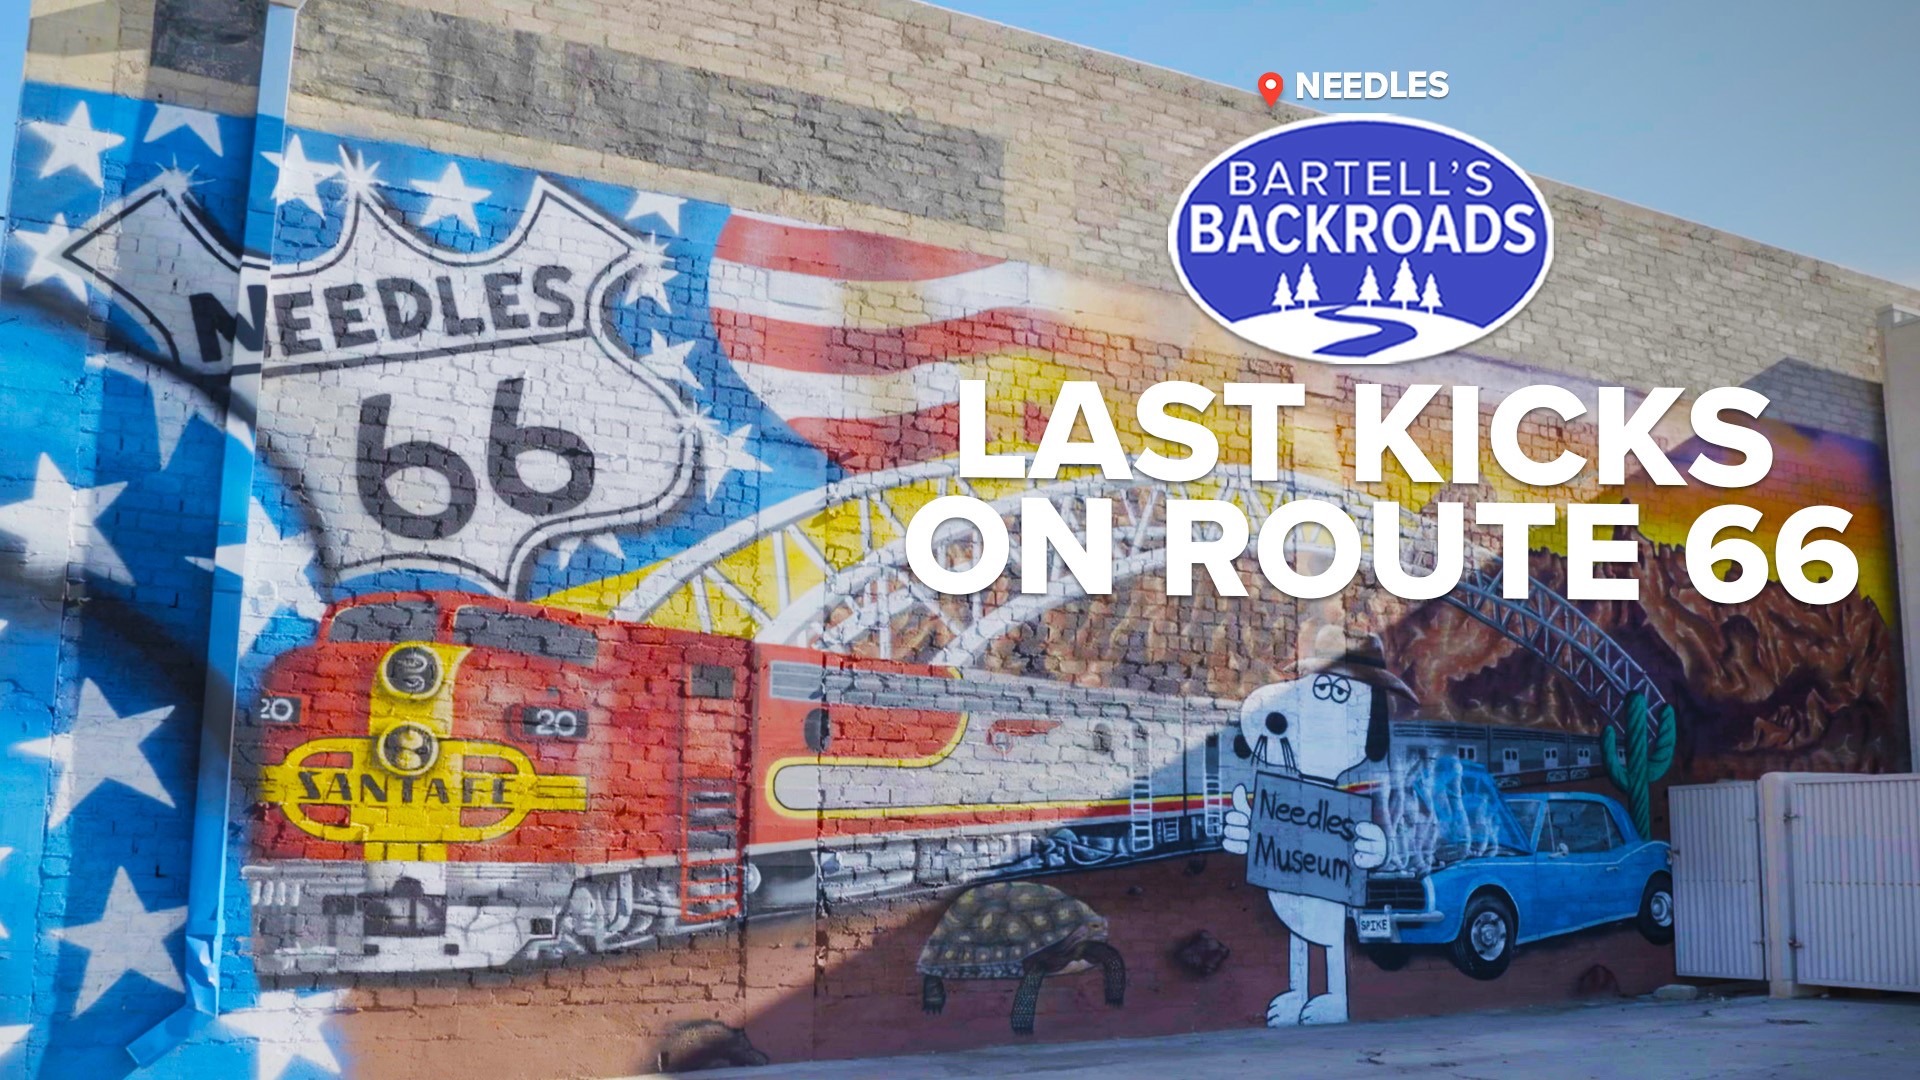 Home to Snoopy's brother Spike, this railroad hot spot is the last stop on Route 66 as you leave the Golden State.